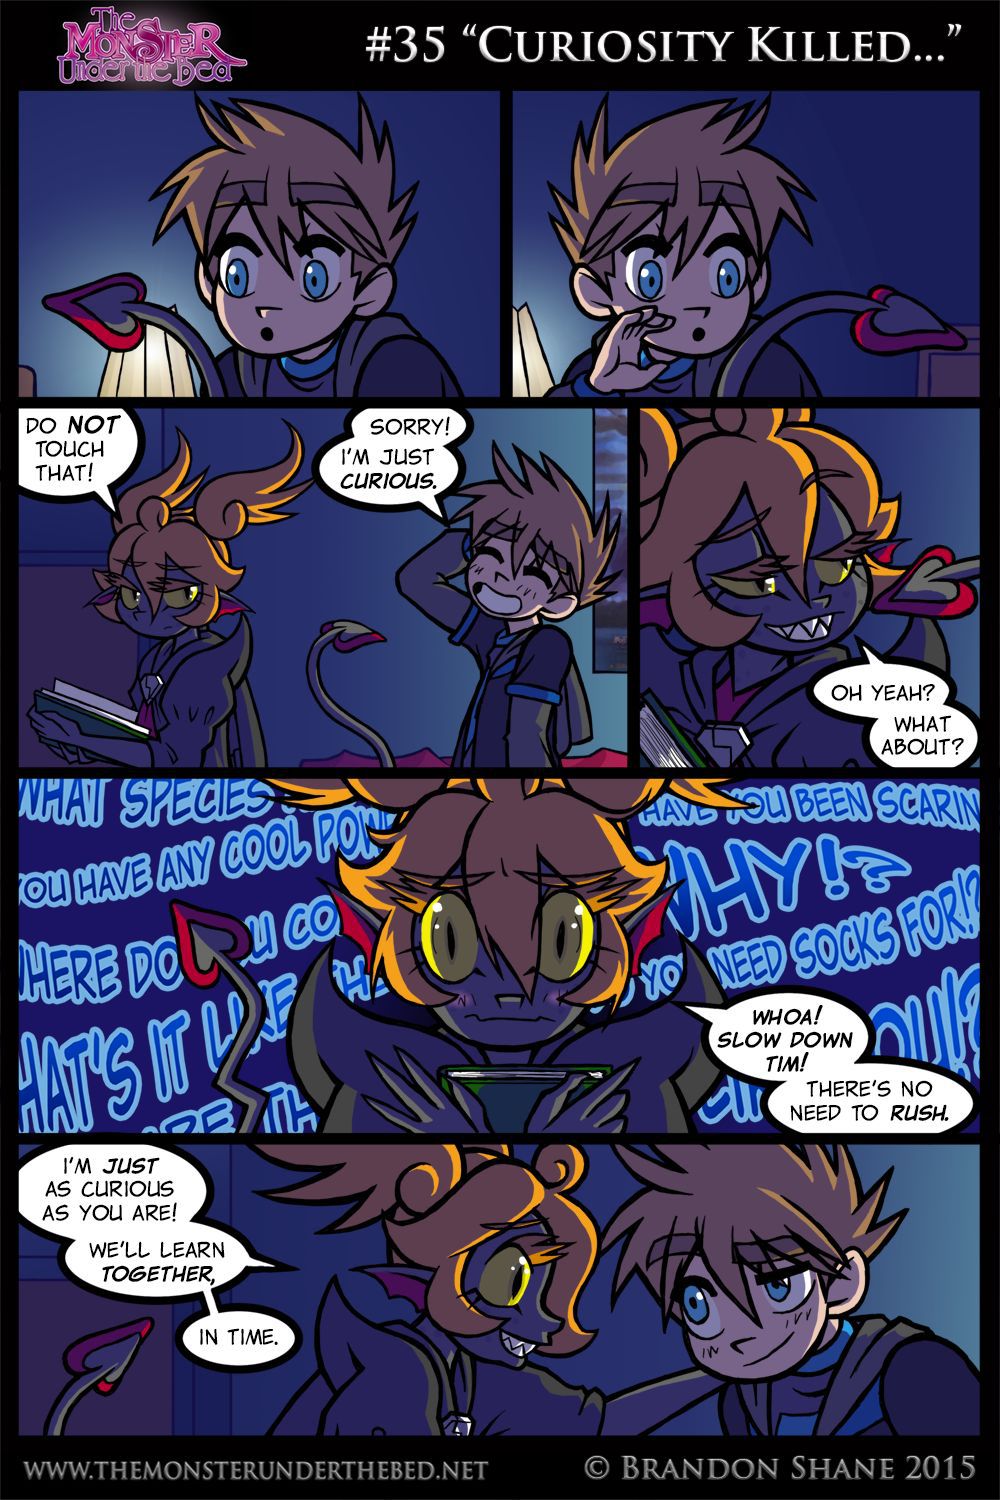 [Brandon Shane] The Monster Under the Bed [Ongoing] 36